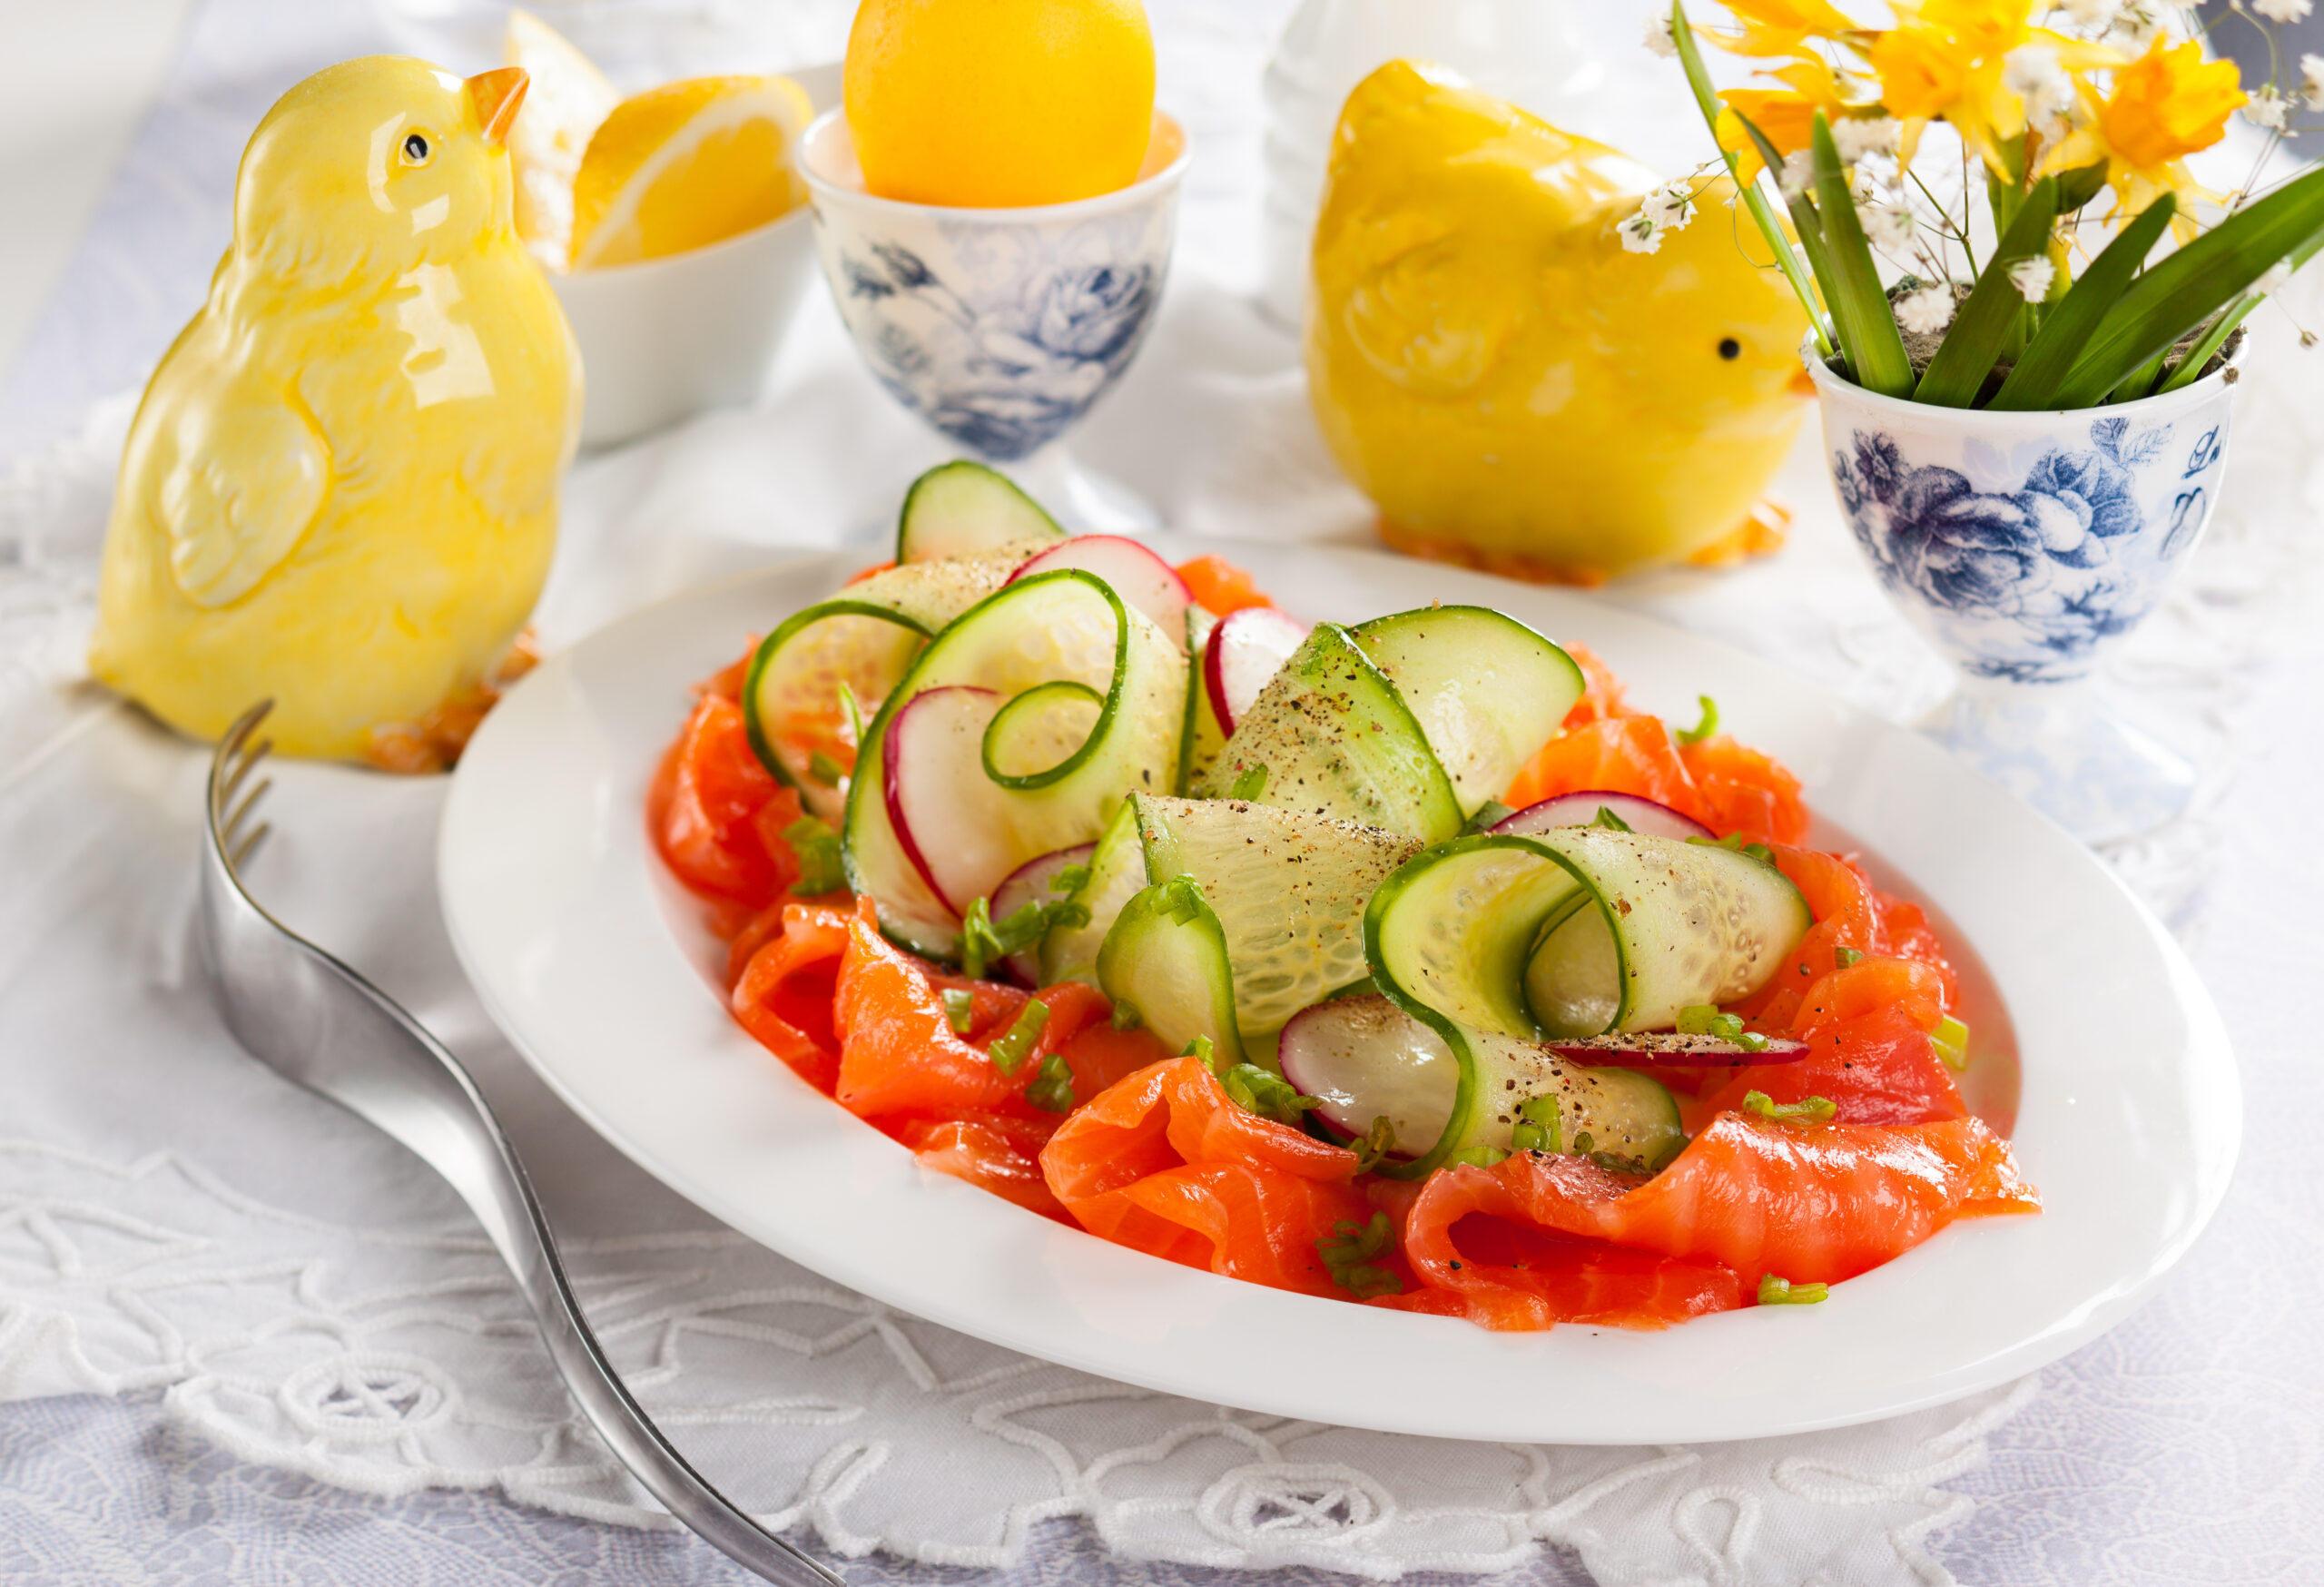 Smoked,Salmon,radish,And,Cucumber,Salad,For,Easter